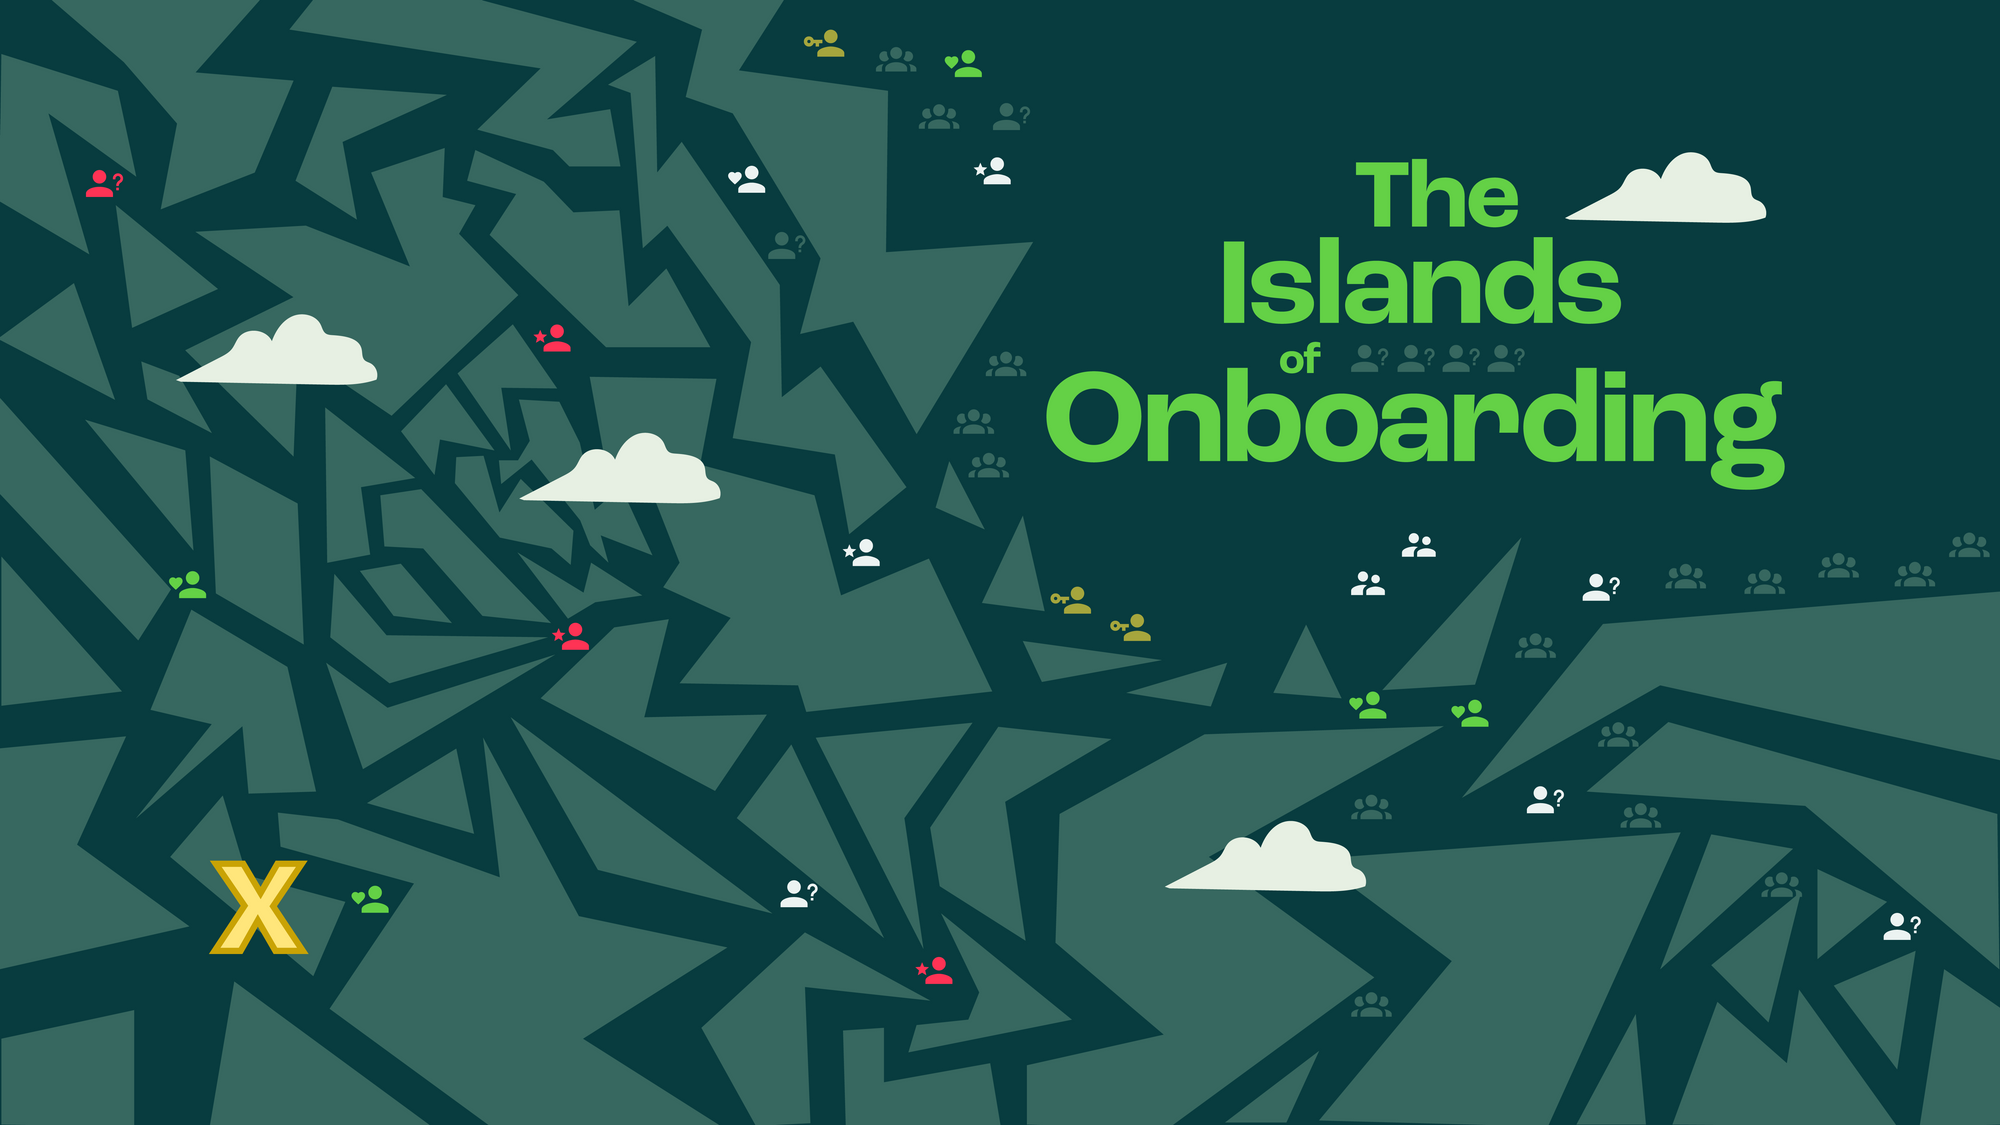 What if you had a treasure map to navigate onboarding?